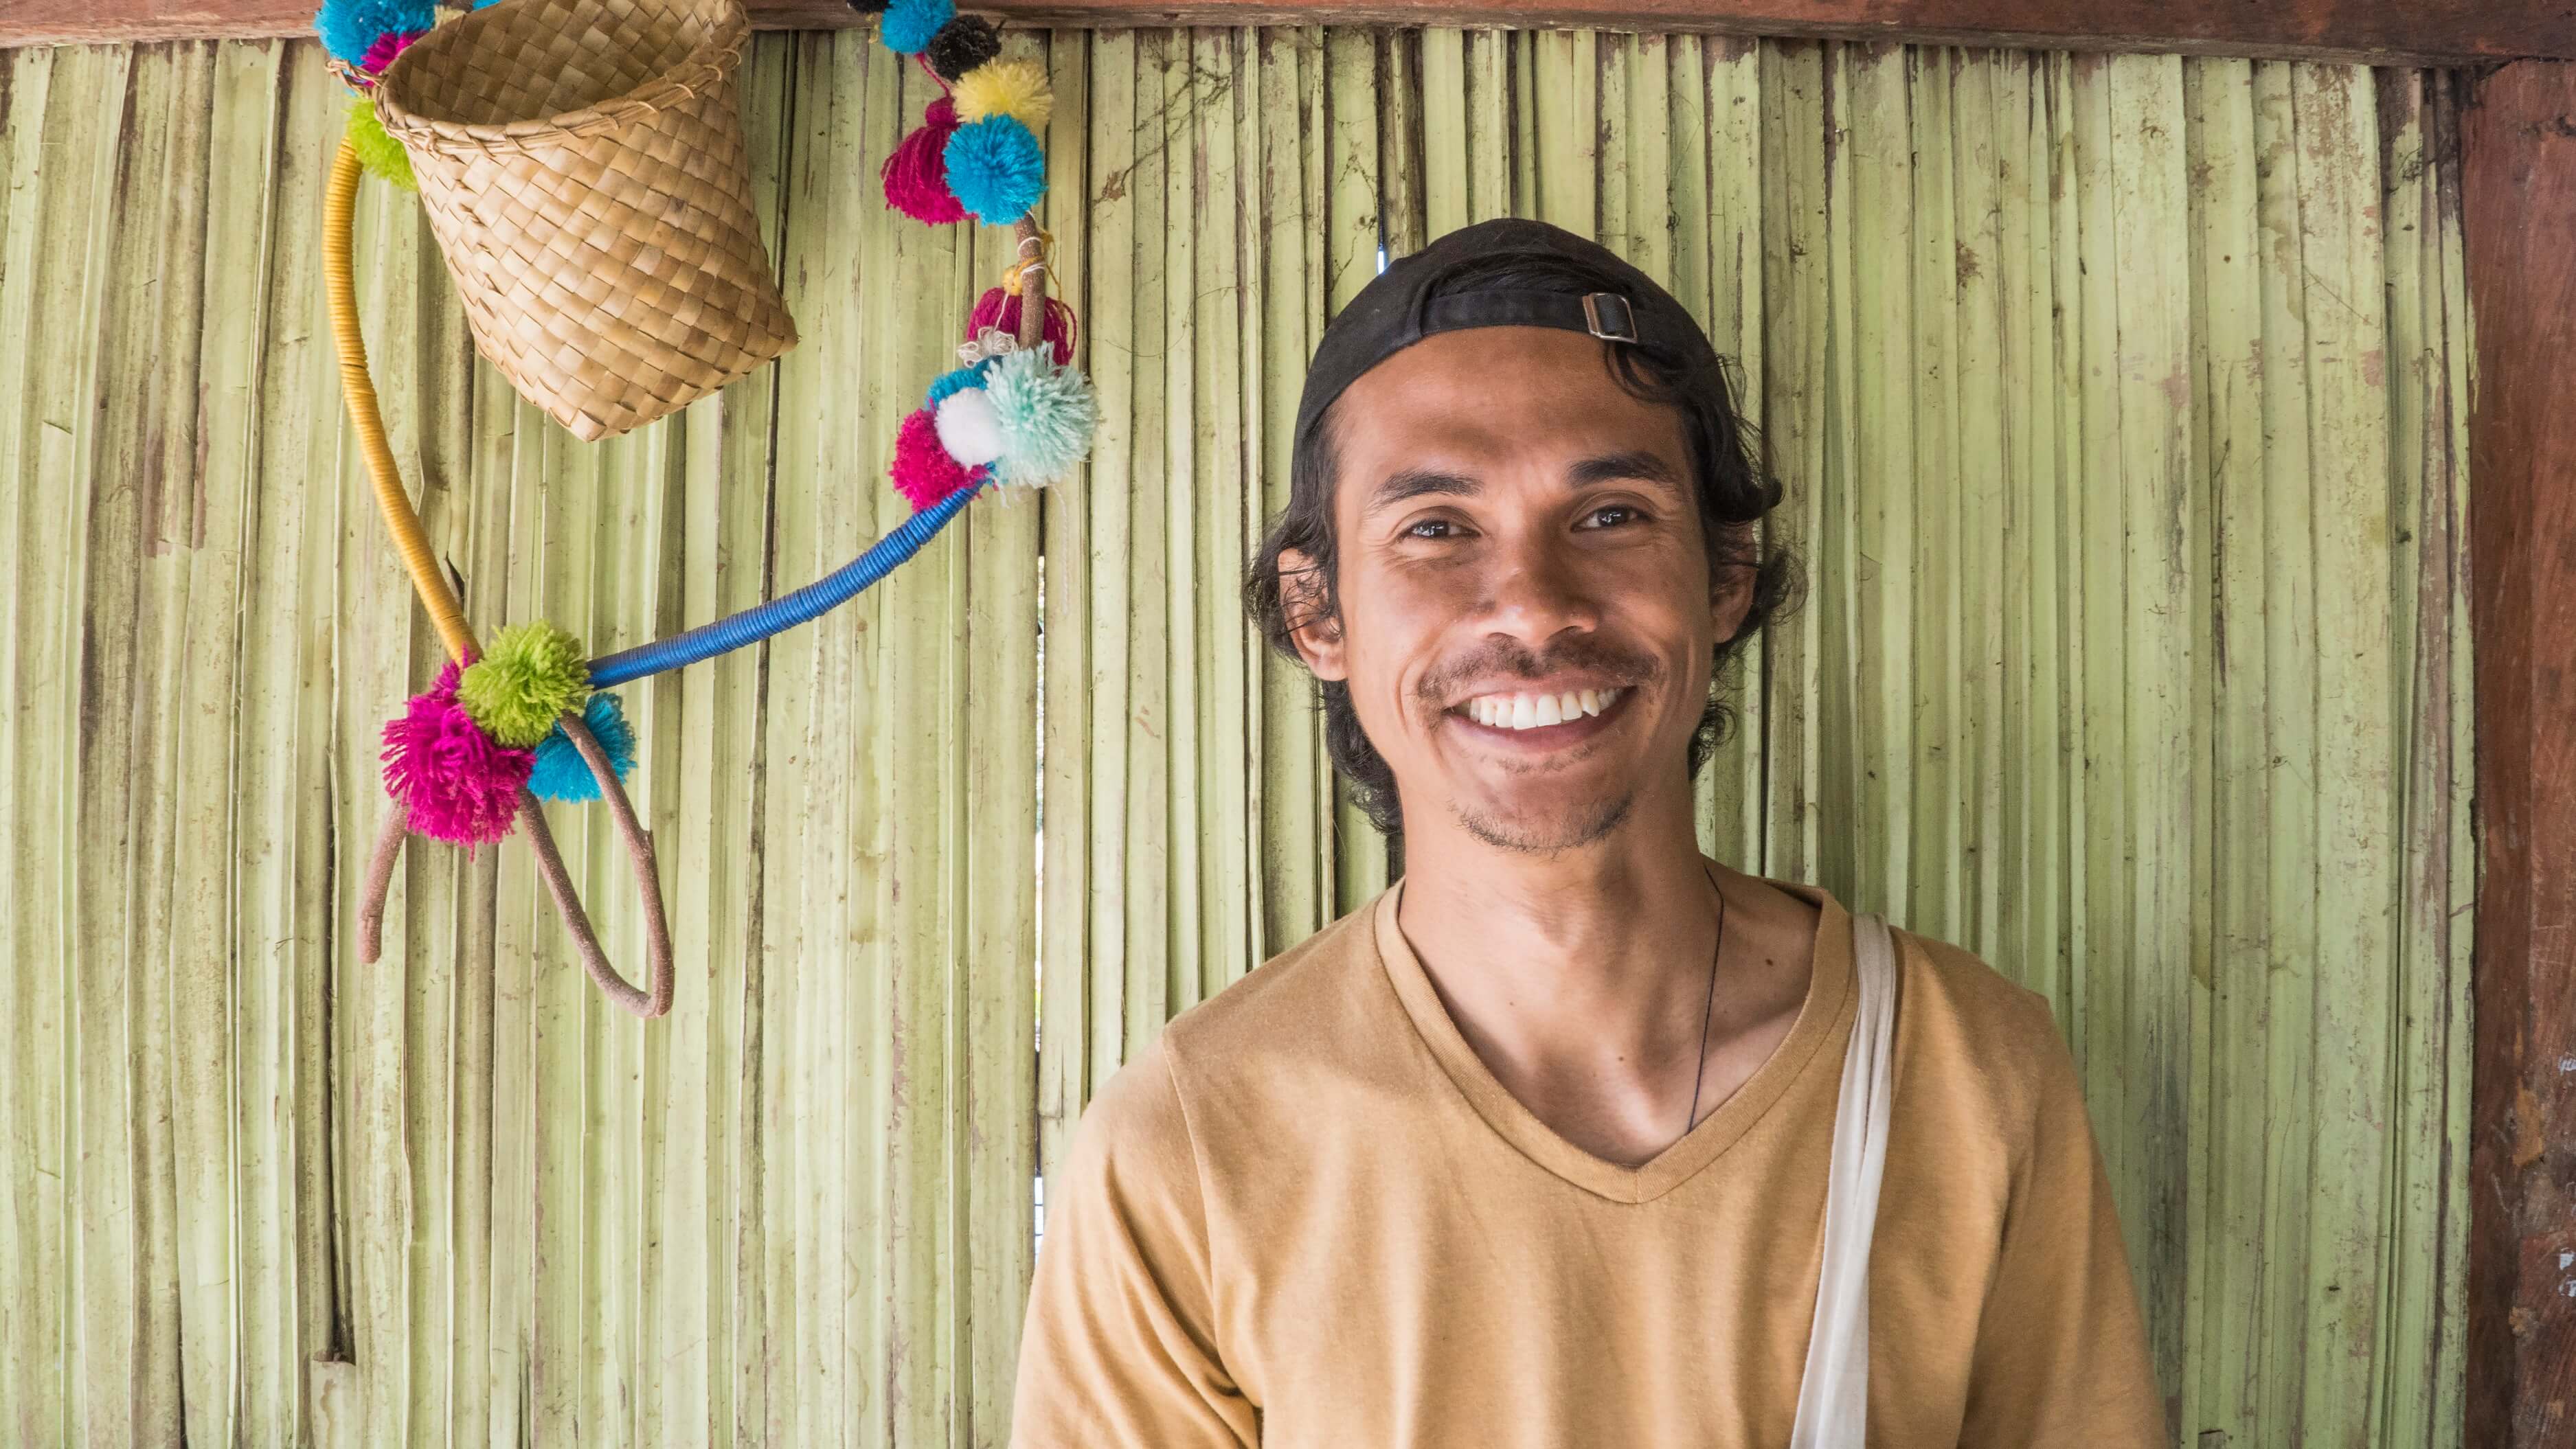 Dicky is the co-founder of Lakoat.Kujawas, a social enterprise preserving the culture of Mollo Timorese through the arts and culinary innovation.